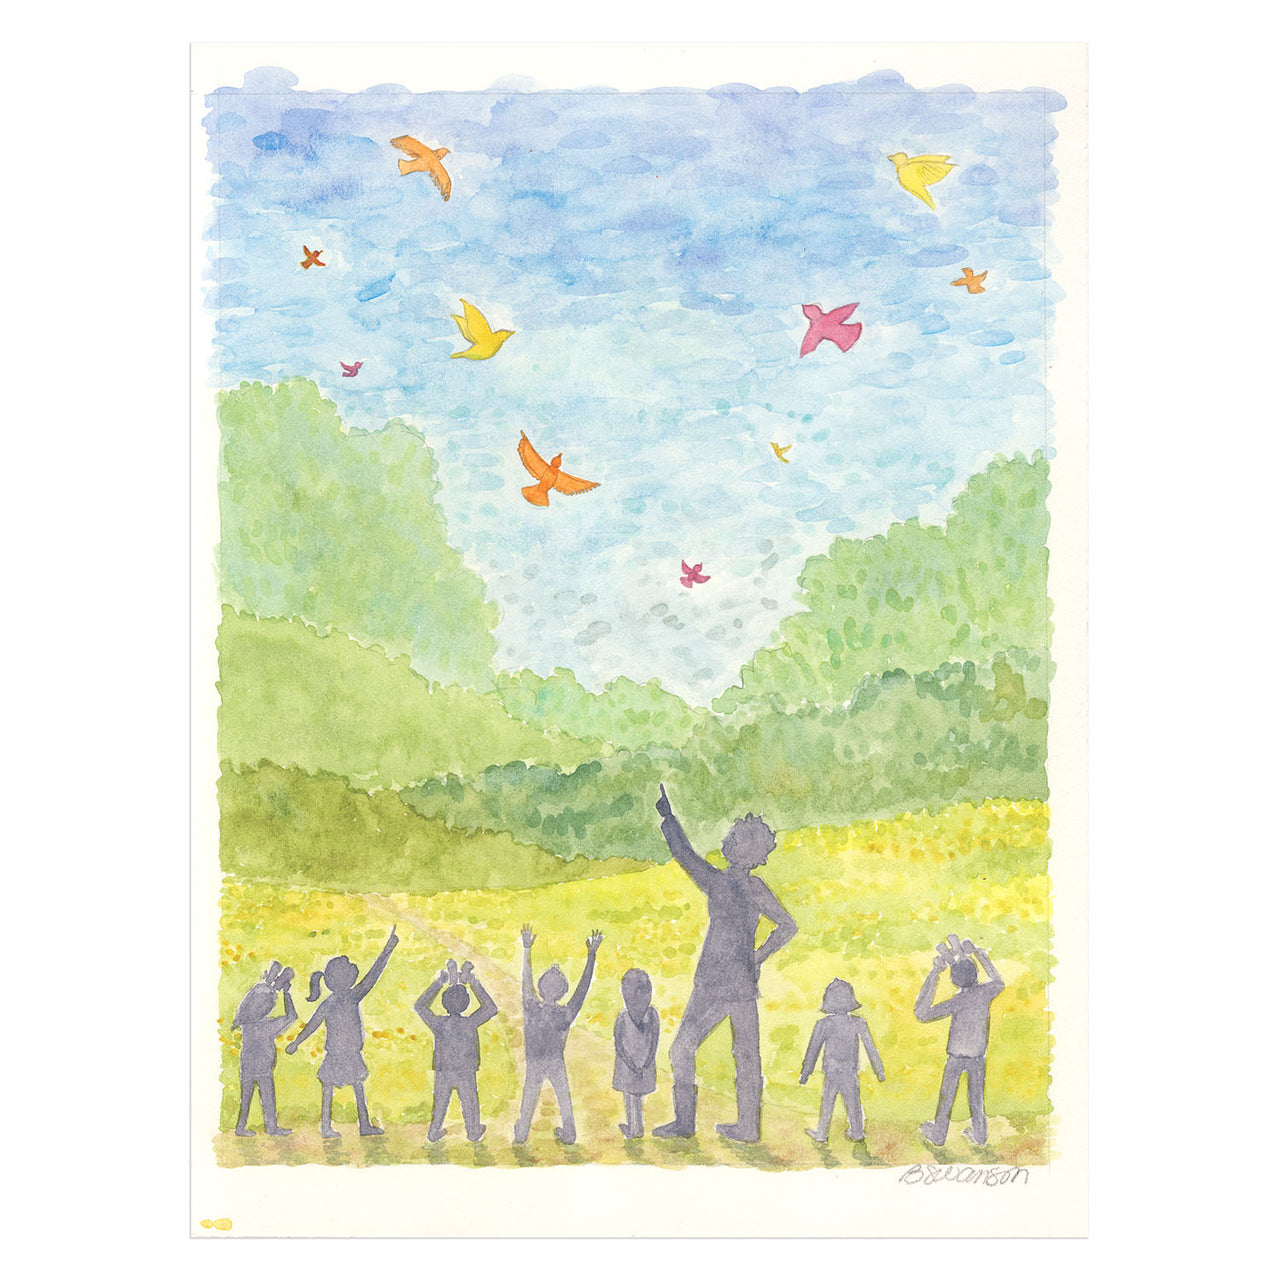 original watercolor painting shows silhouettes of a class of students with teacher looking at birds with binoculars